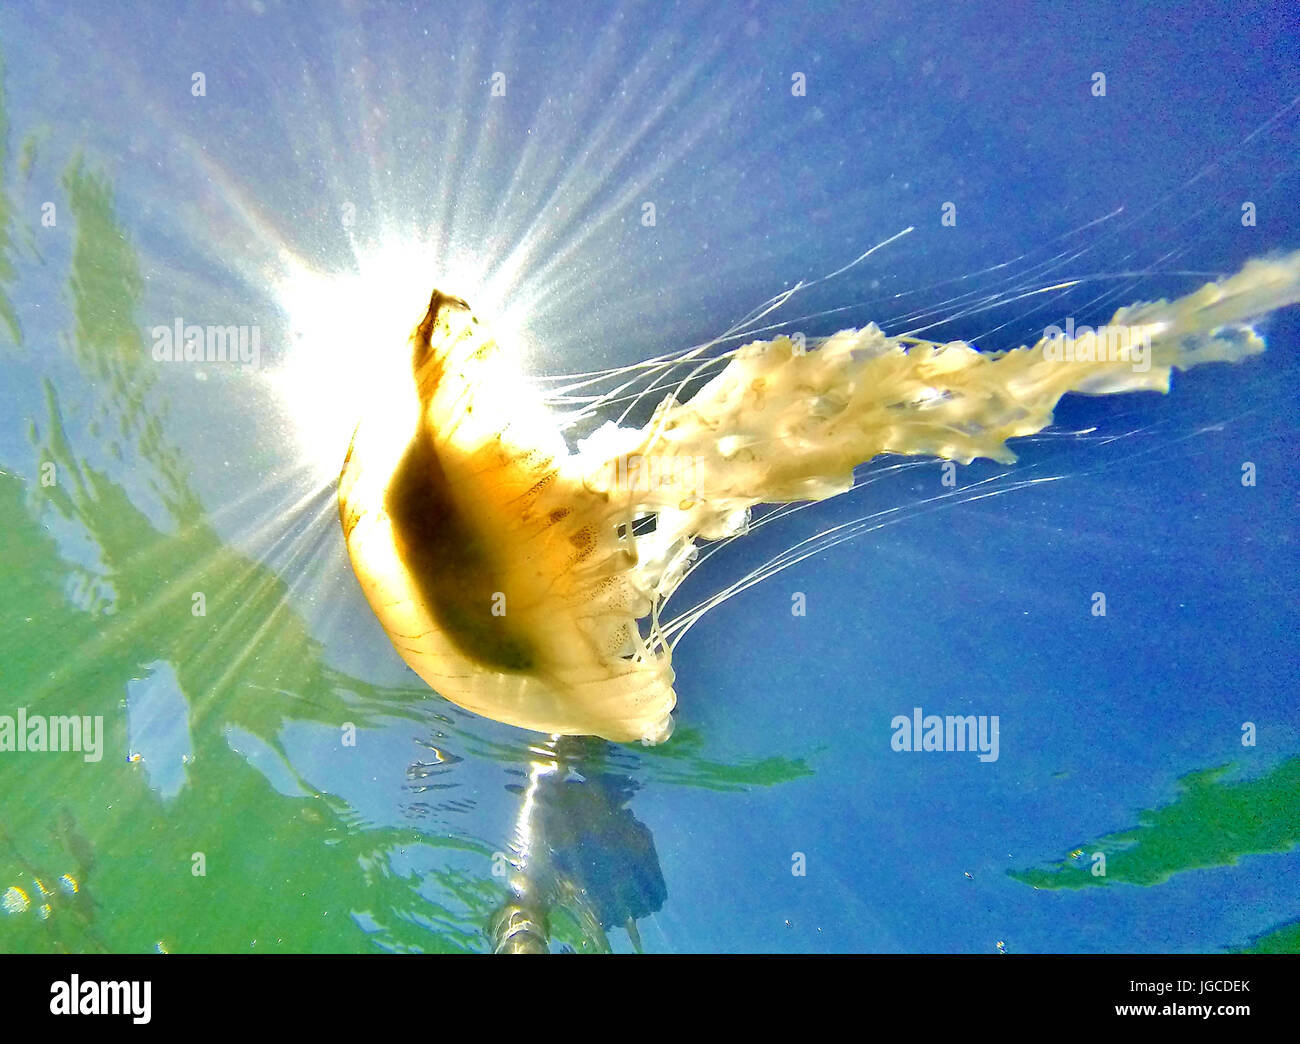 Beachlands, Hayling Island. 05th July 2017. High pressure anticyclonic conditions brought hot and sunny weather to the South coast today. A compass jellyfish floating in the water off Hayling Island in Hampshire. Credit: james jagger/Alamy Live News Stock Photo